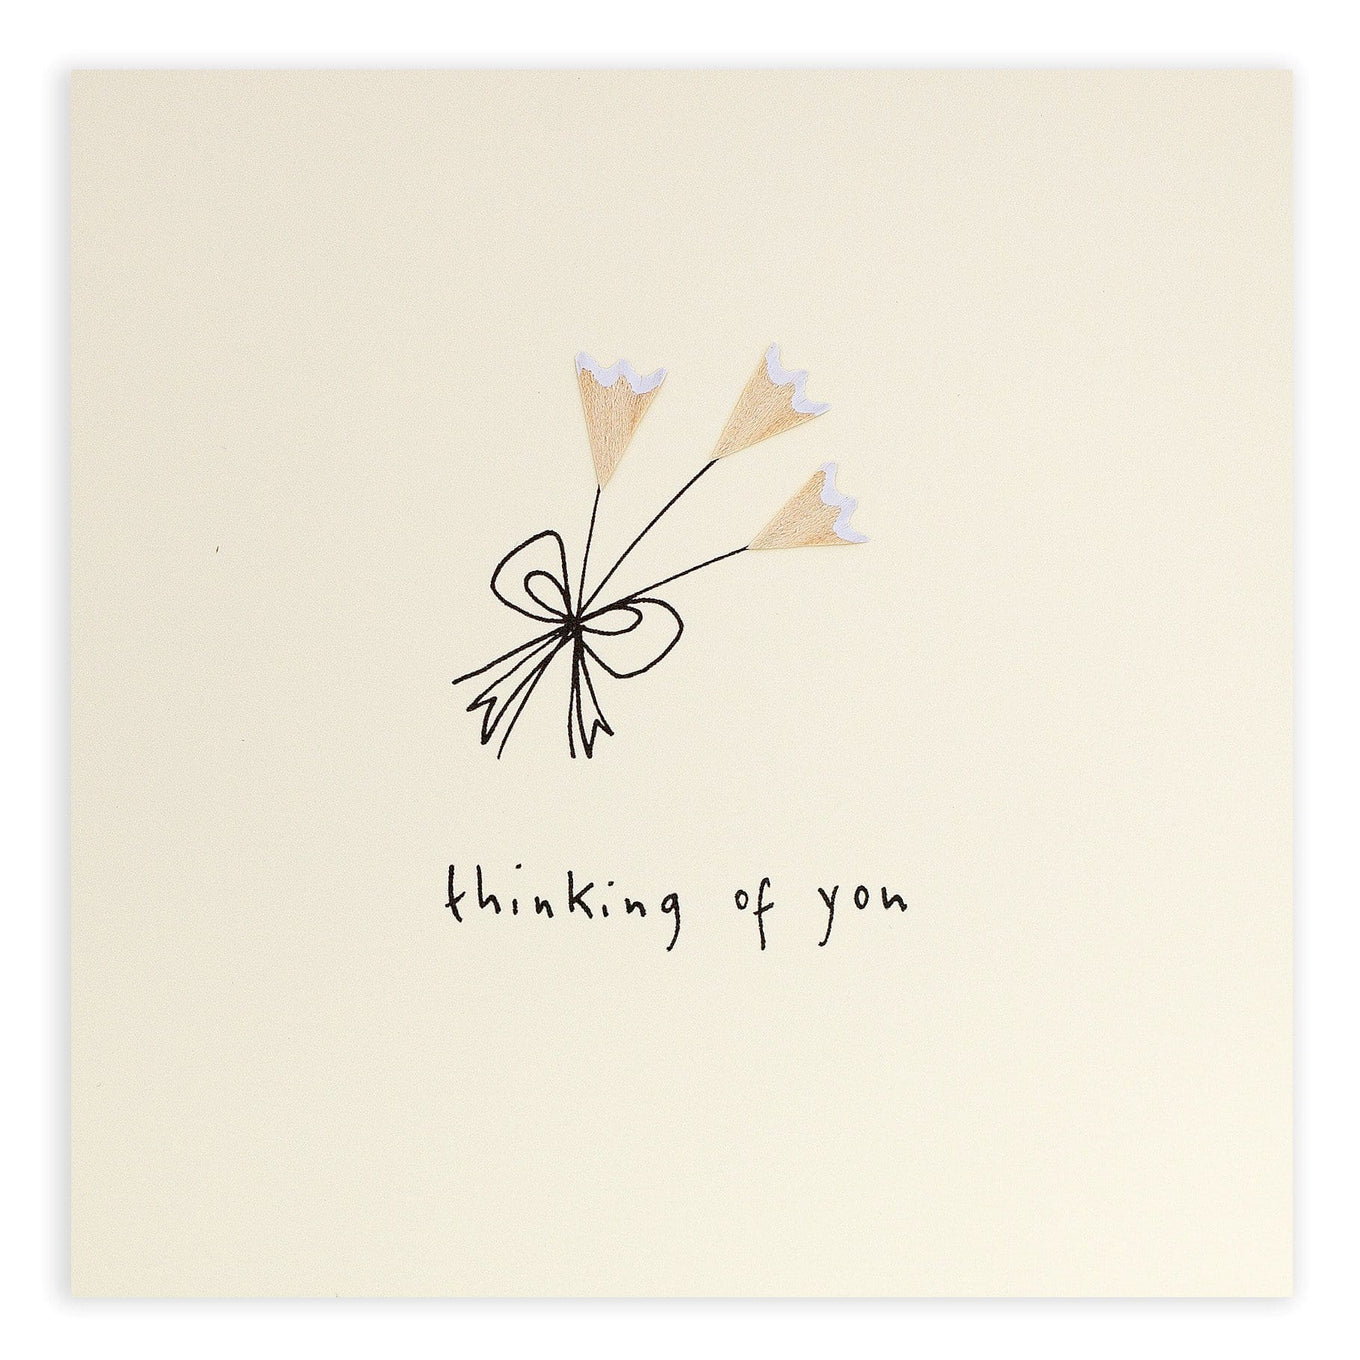 A drawing of a flower bouquet where the flowers are made of white pencil shavings. The card reads, "thinking of you."